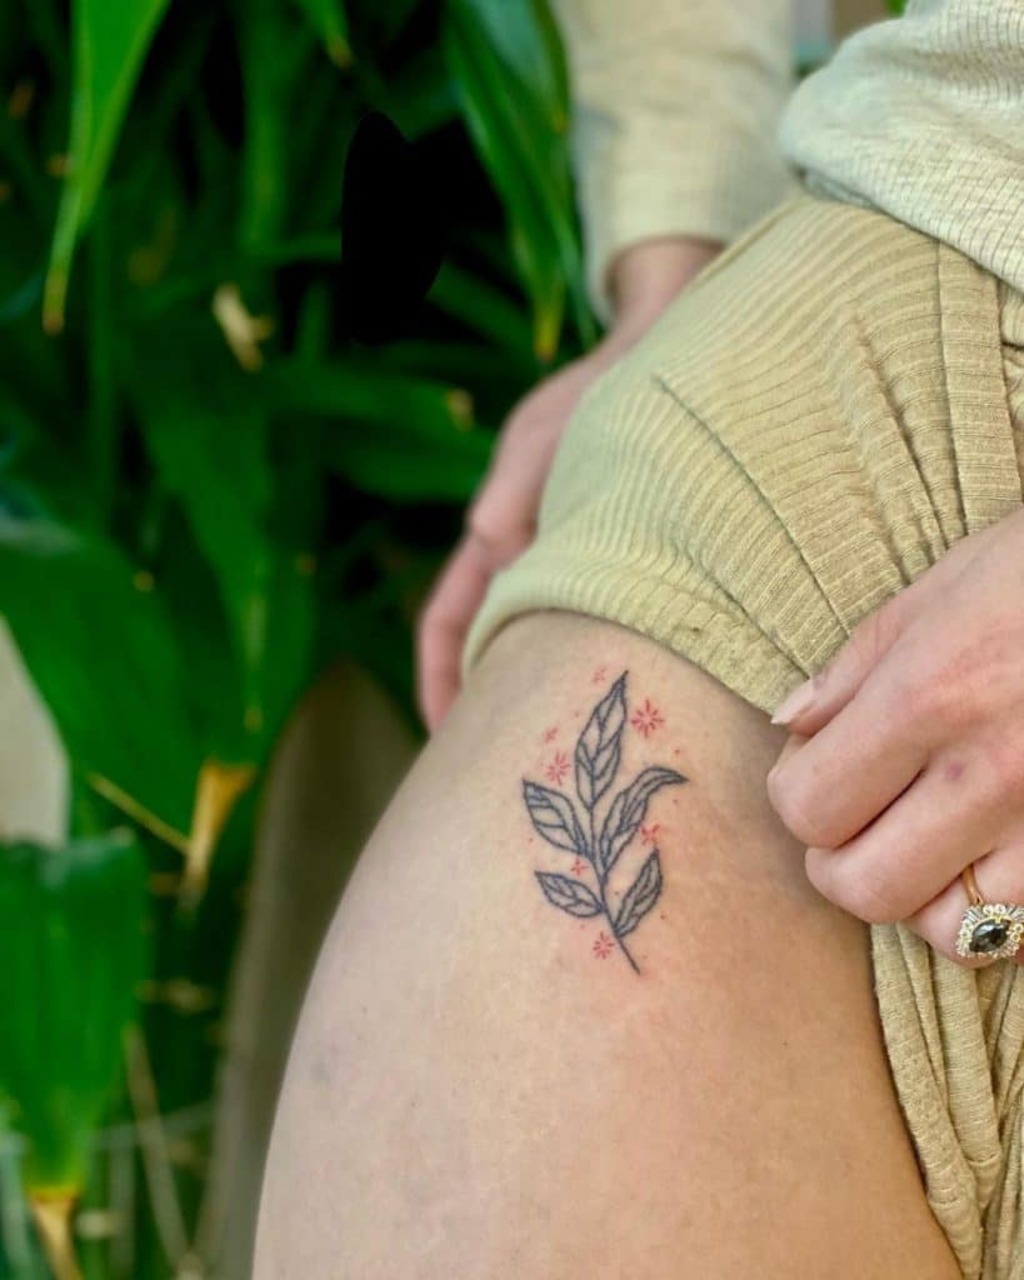 Women with a tattoo on her thigh
